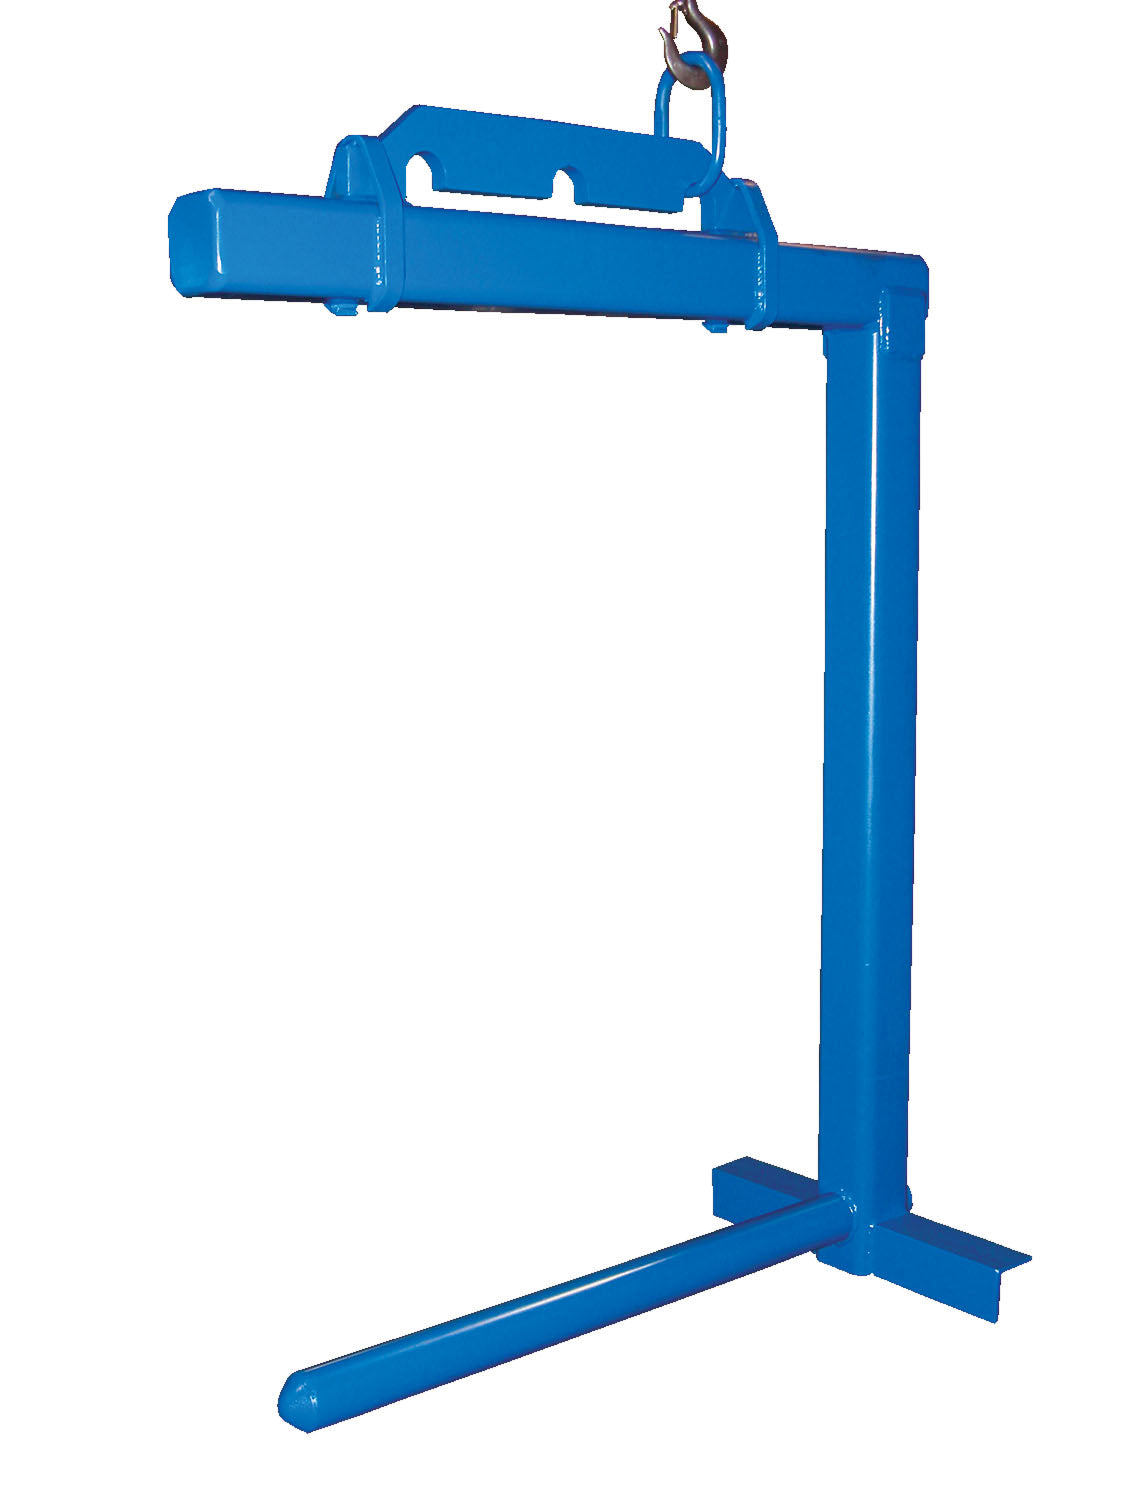 36" Coil Lifter